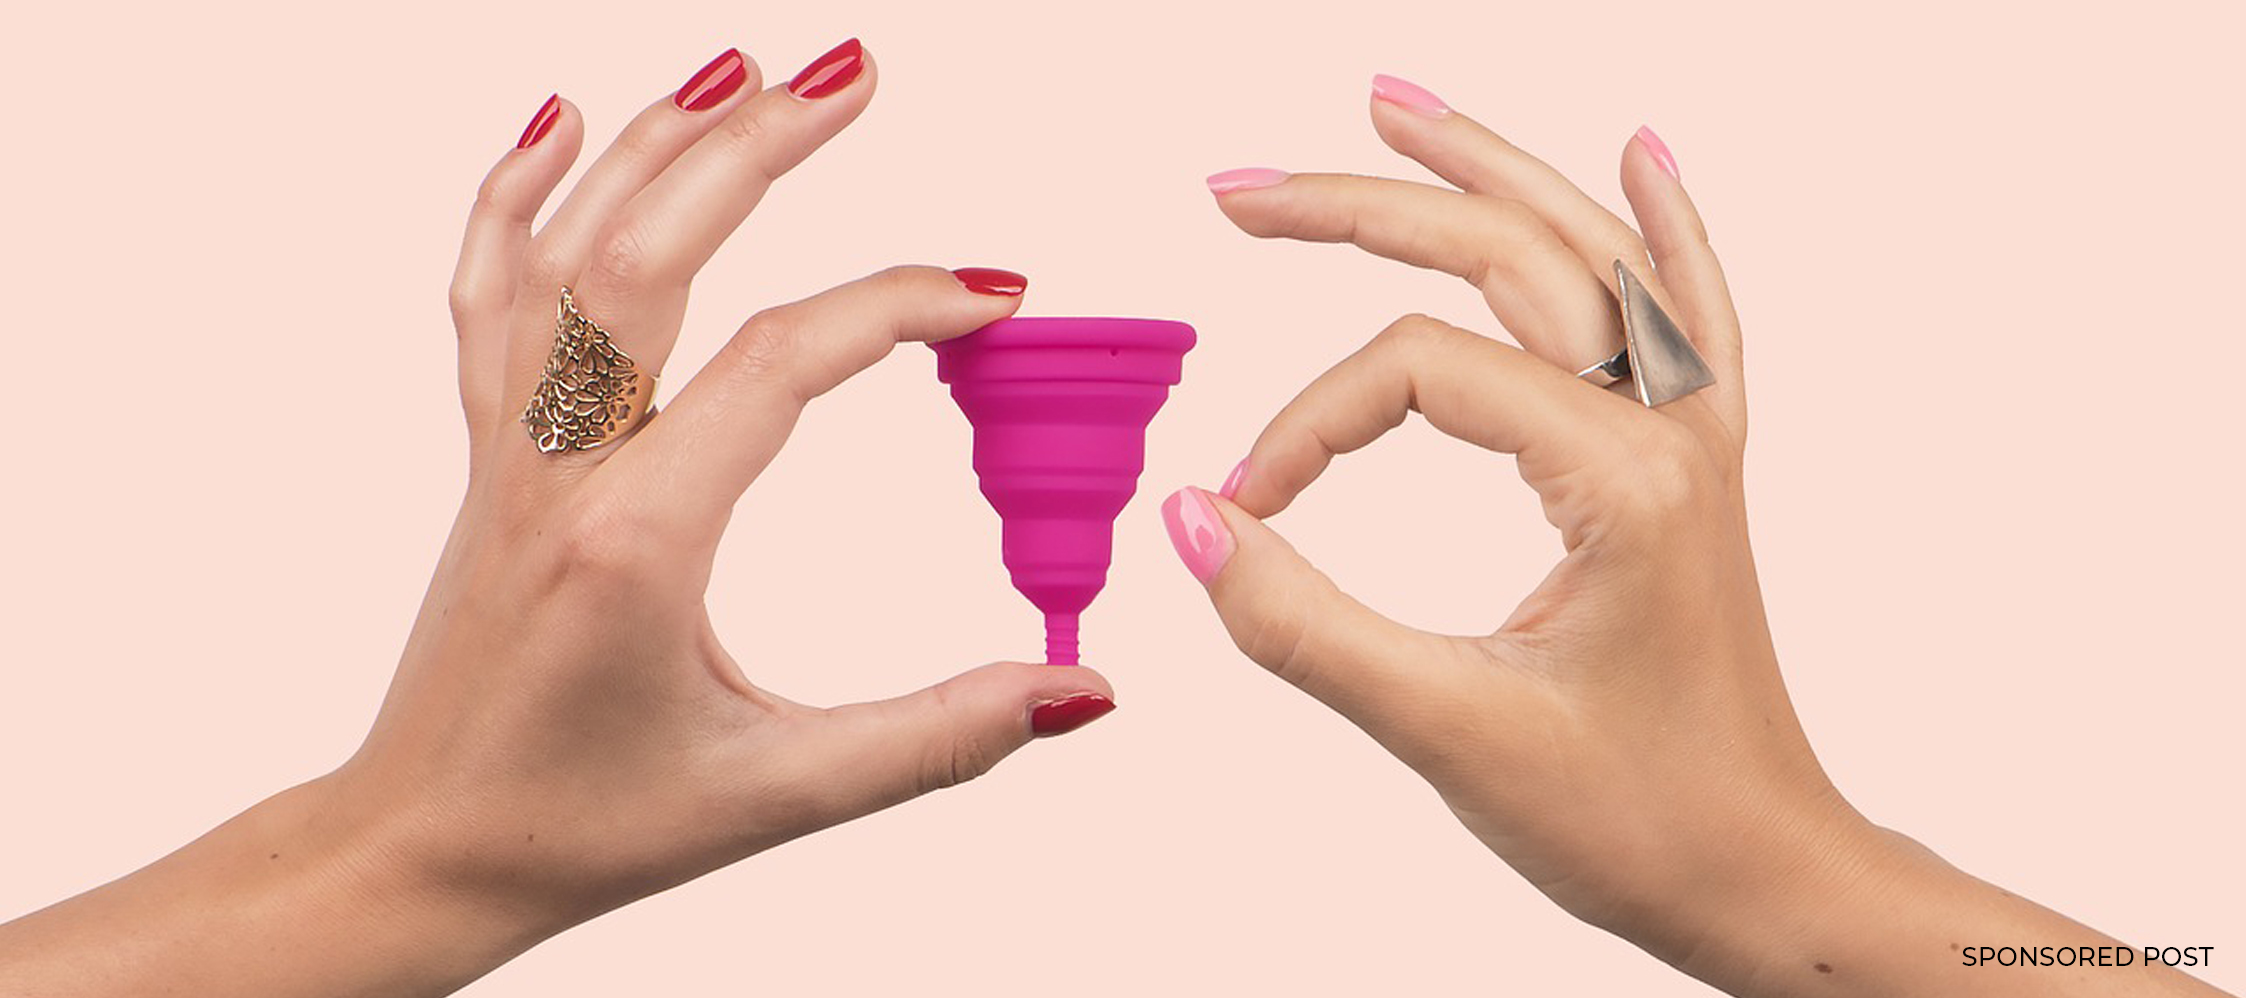 On Menstrual Products: Why are Menstrual Cups Becoming More Popular?